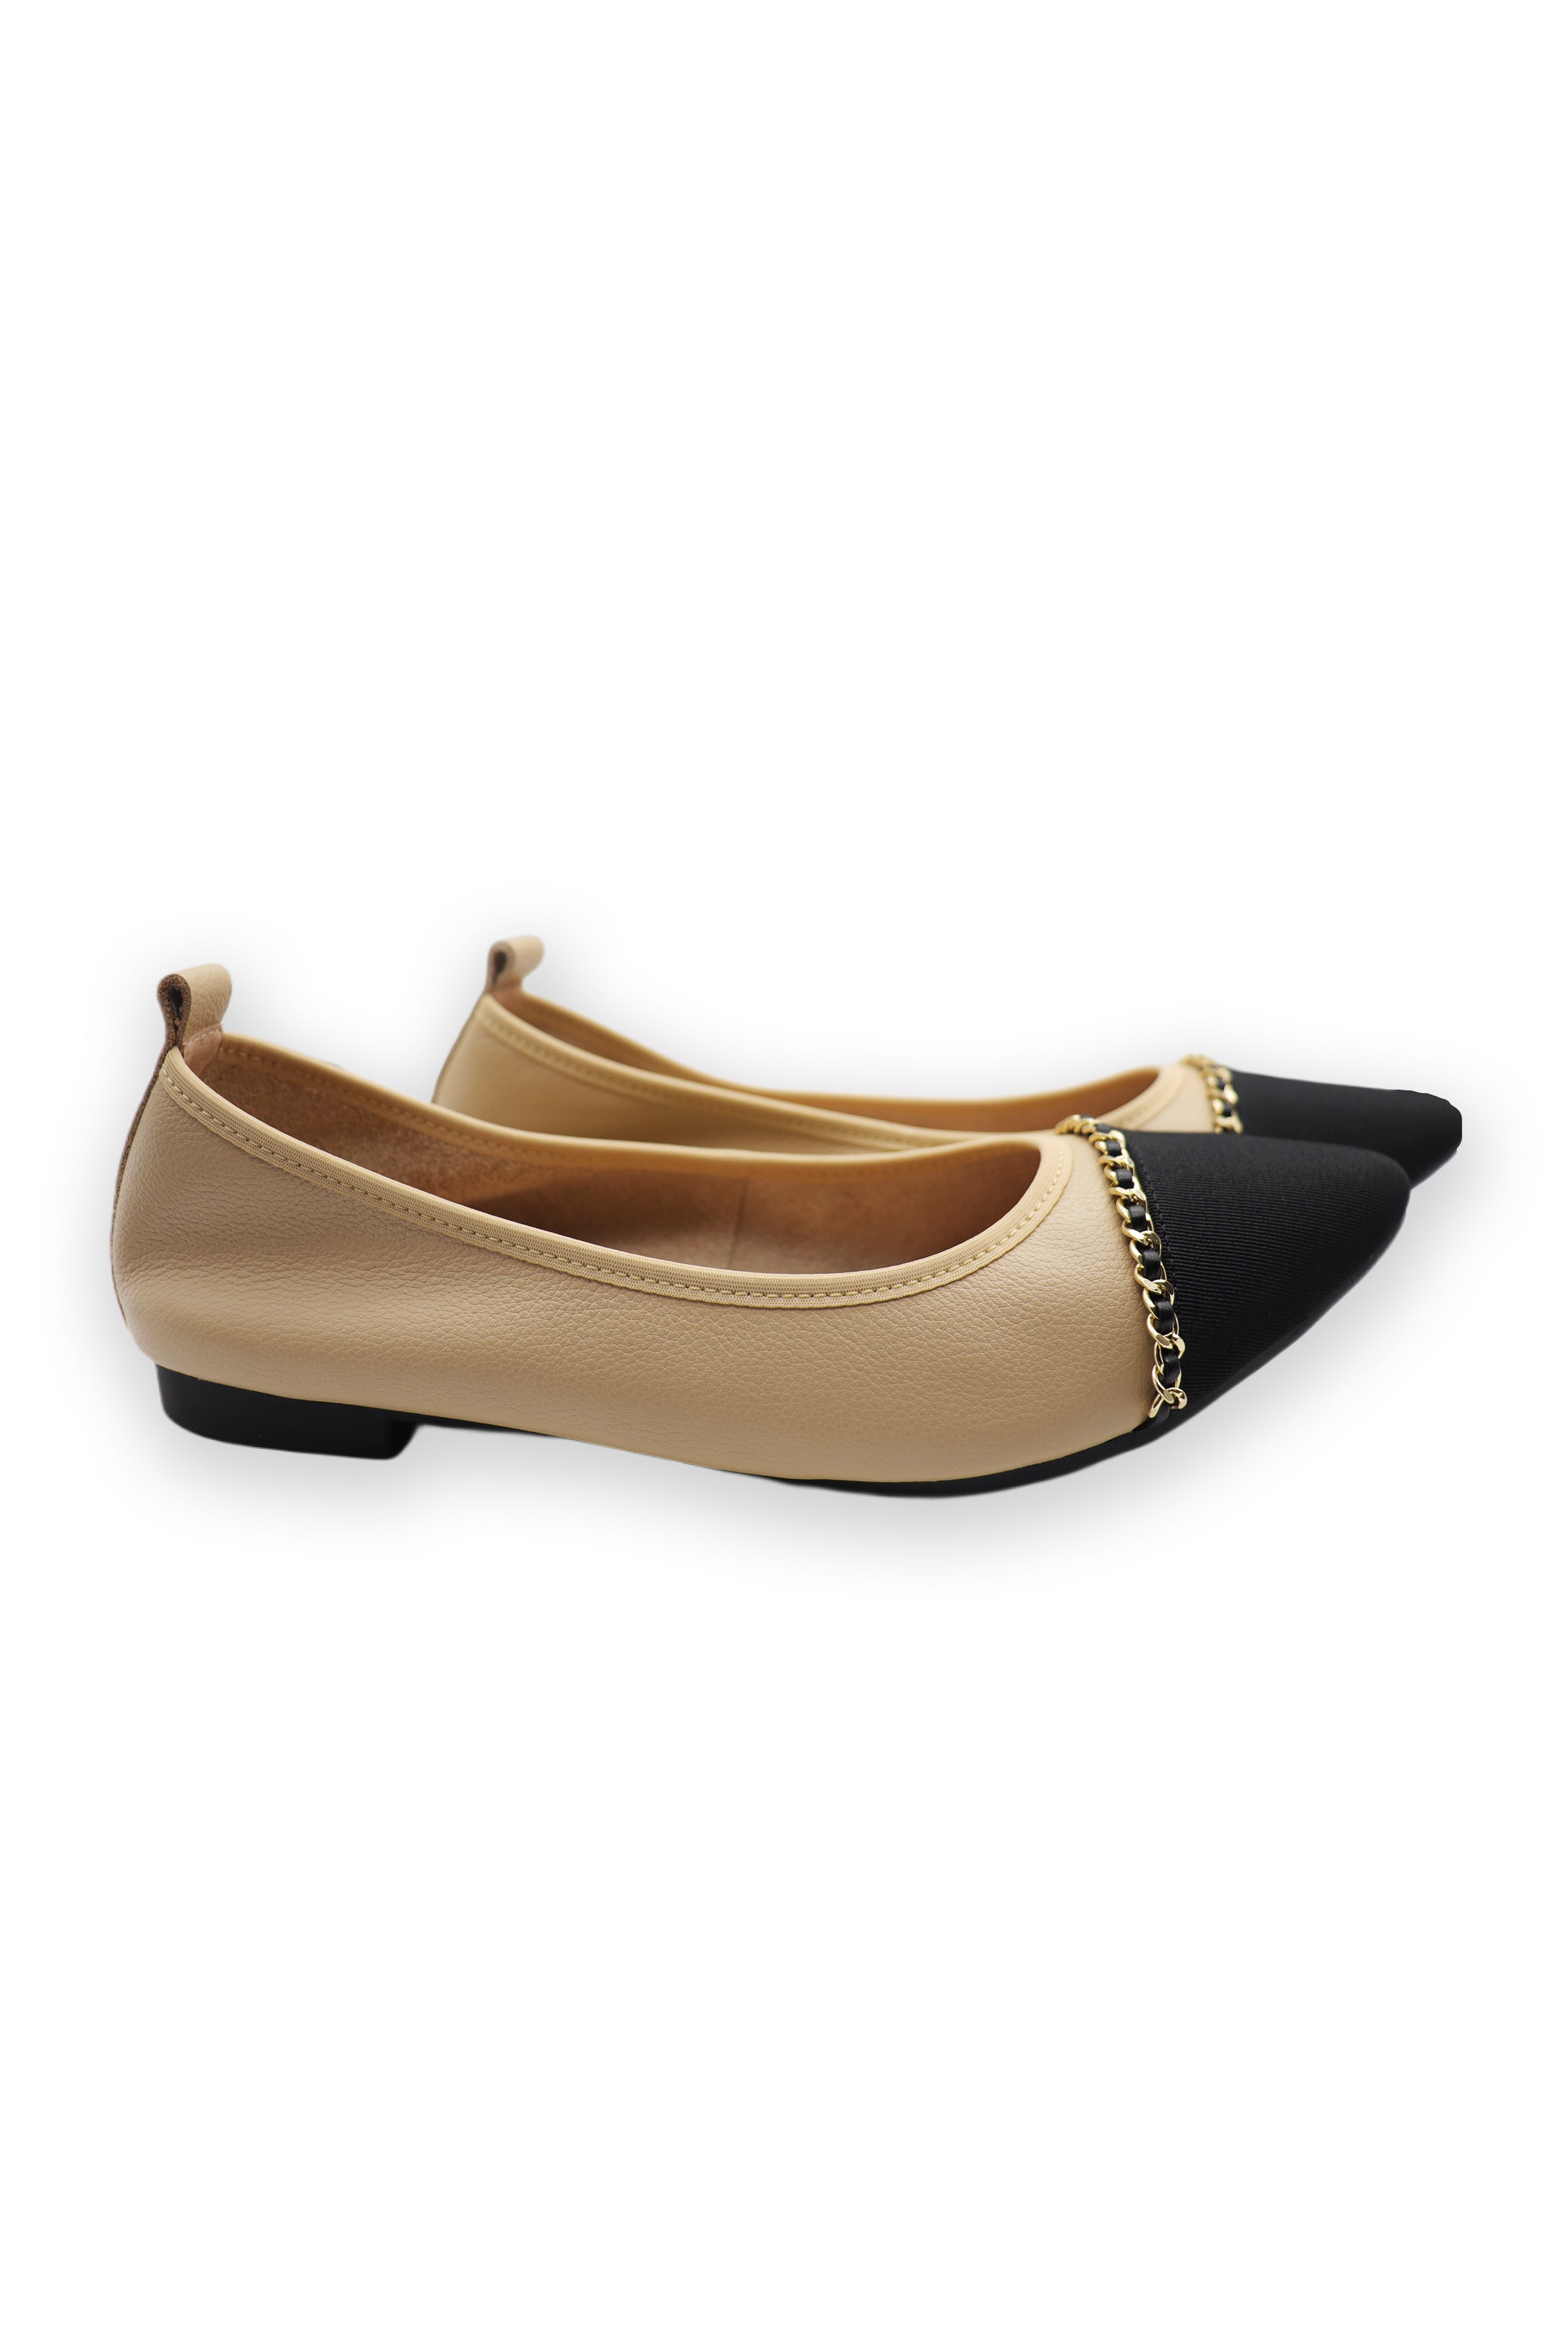 Apricot and Black Cowhide Leather Pointy Heels Flat Commuter Shoes